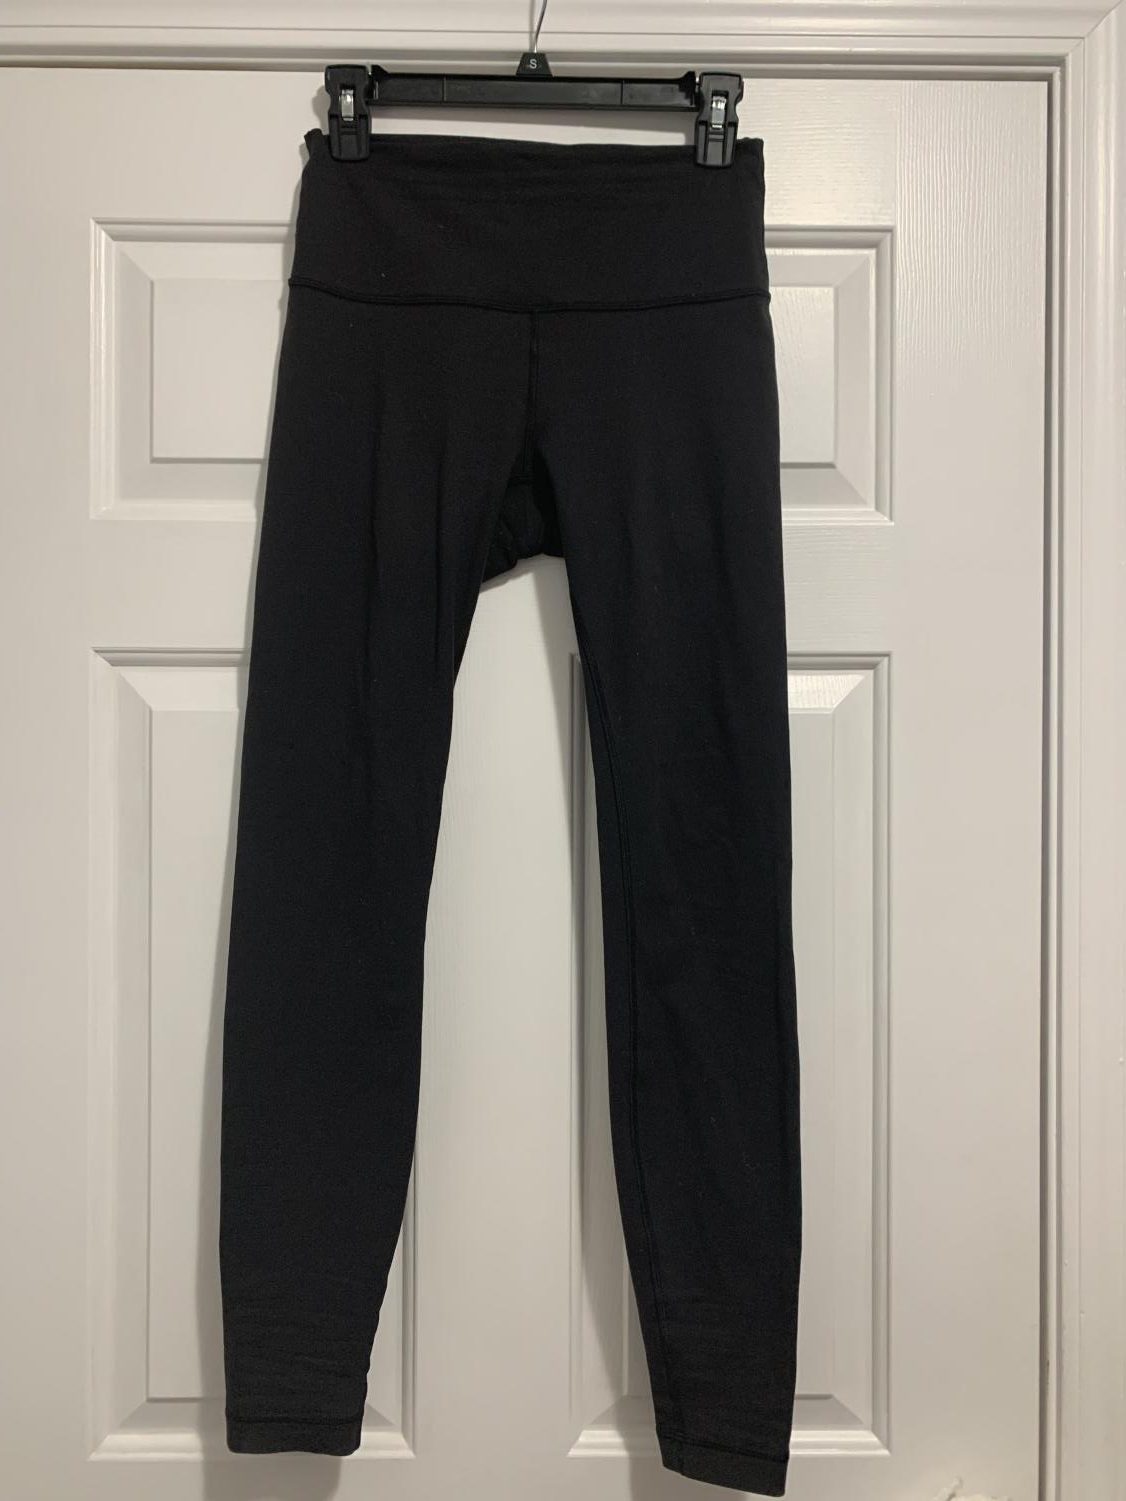 My first pair of aligns … why do they look so awful so fast?? : r/lululemon